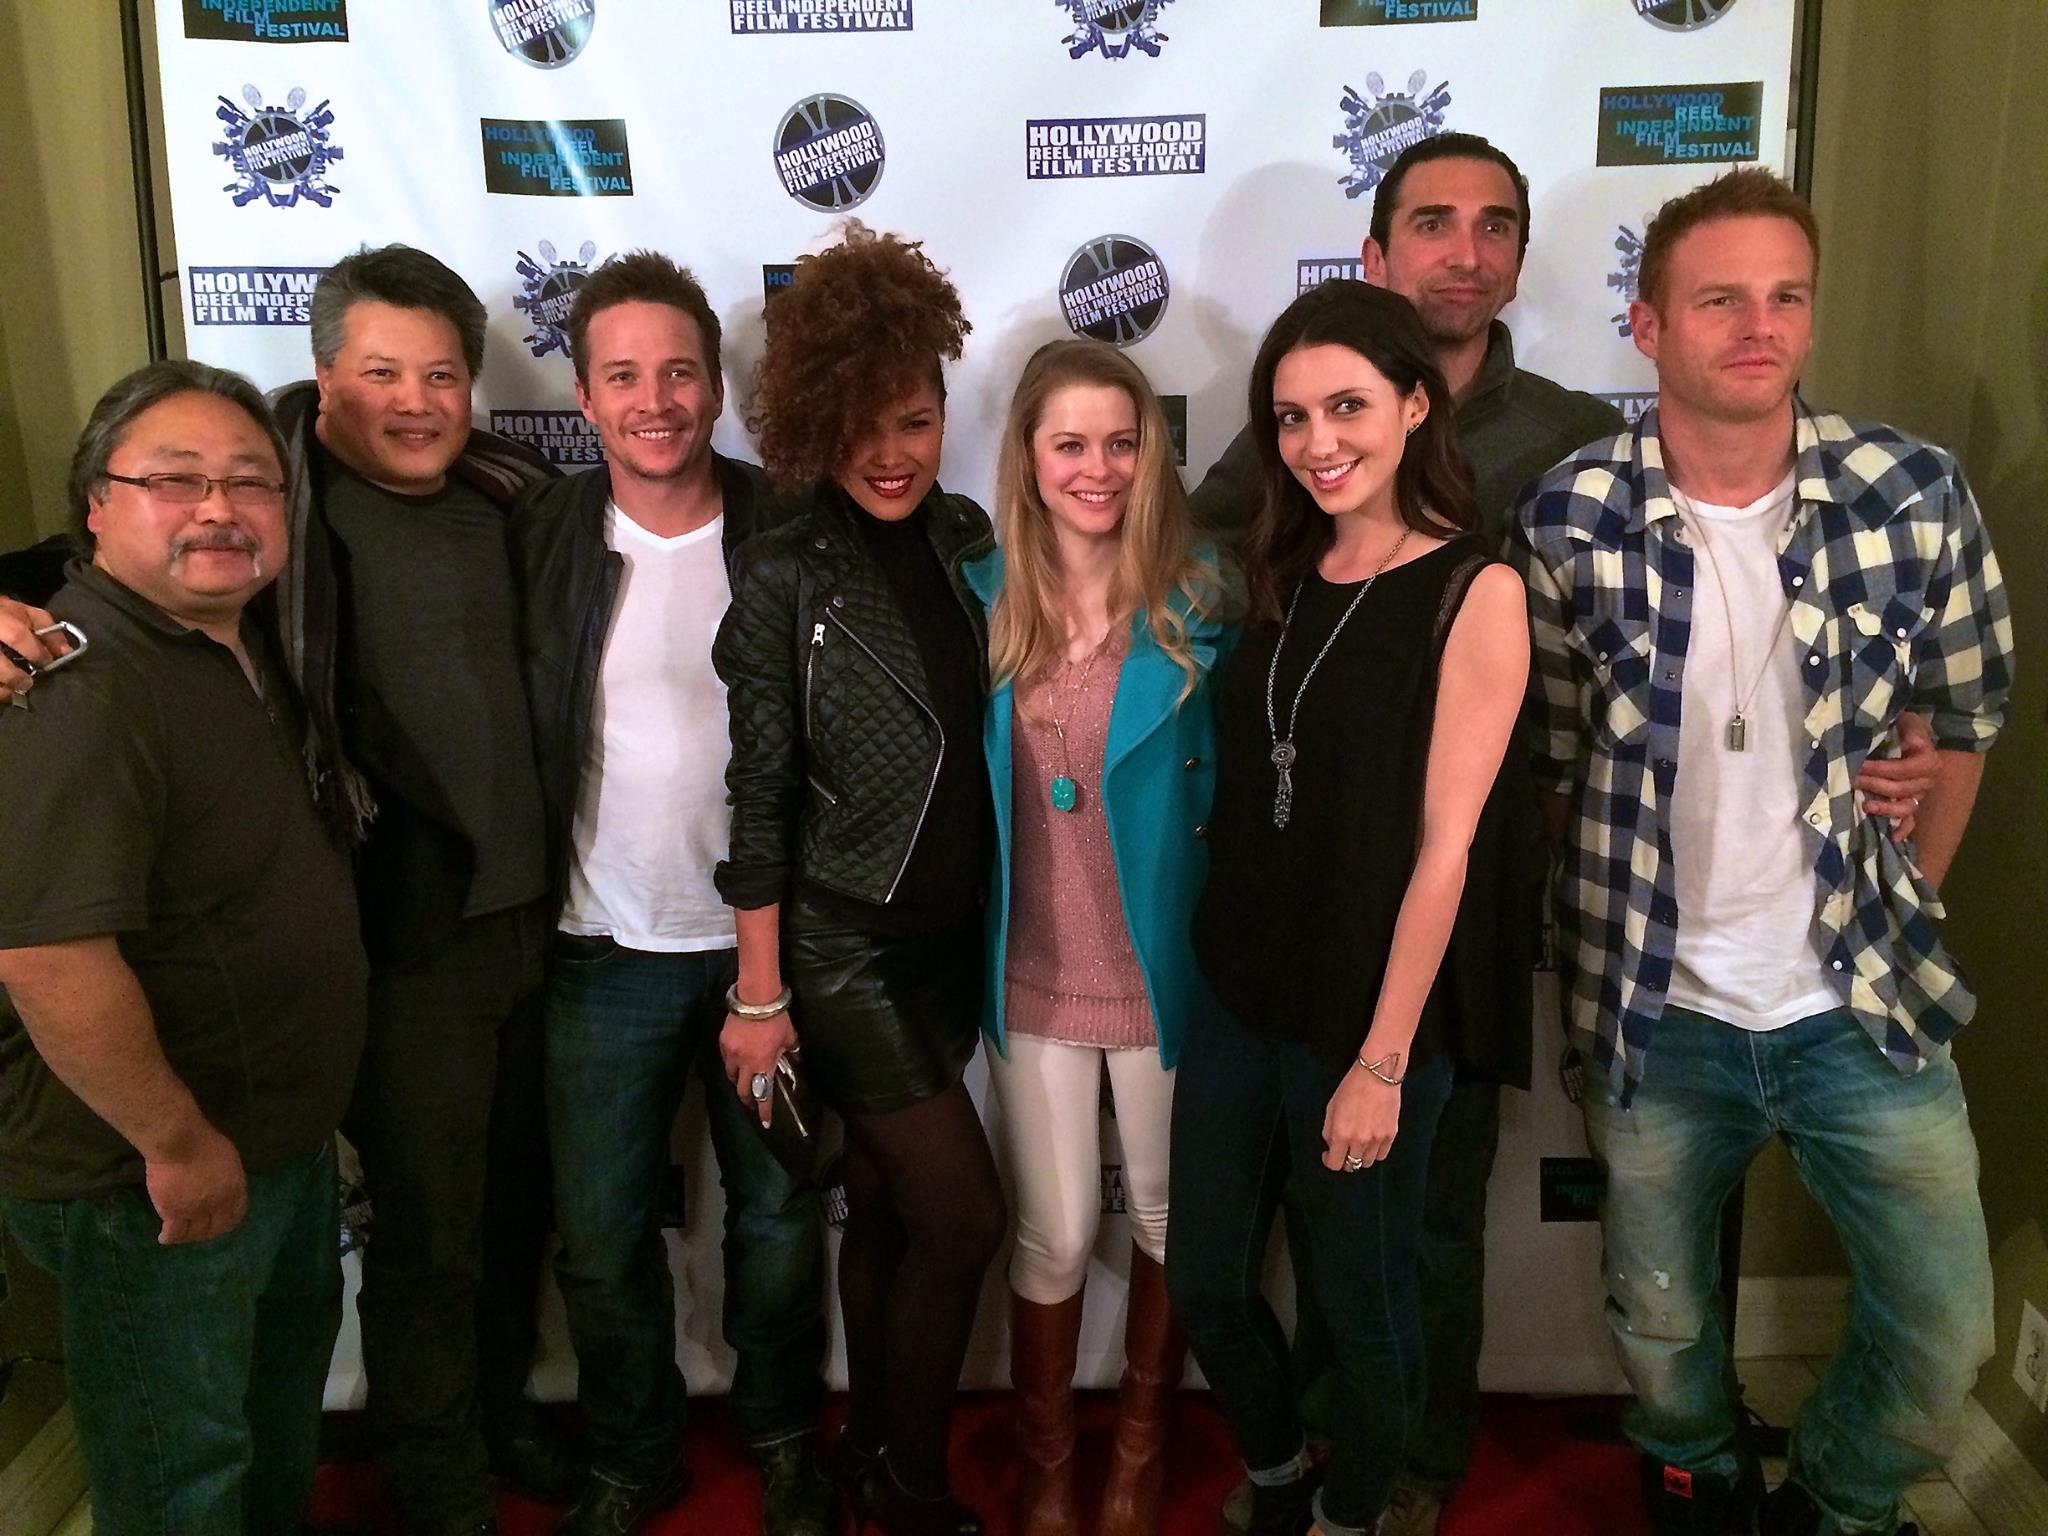 'REBOOT' screening at the Hollywood Reel Independent Film Festival 2015